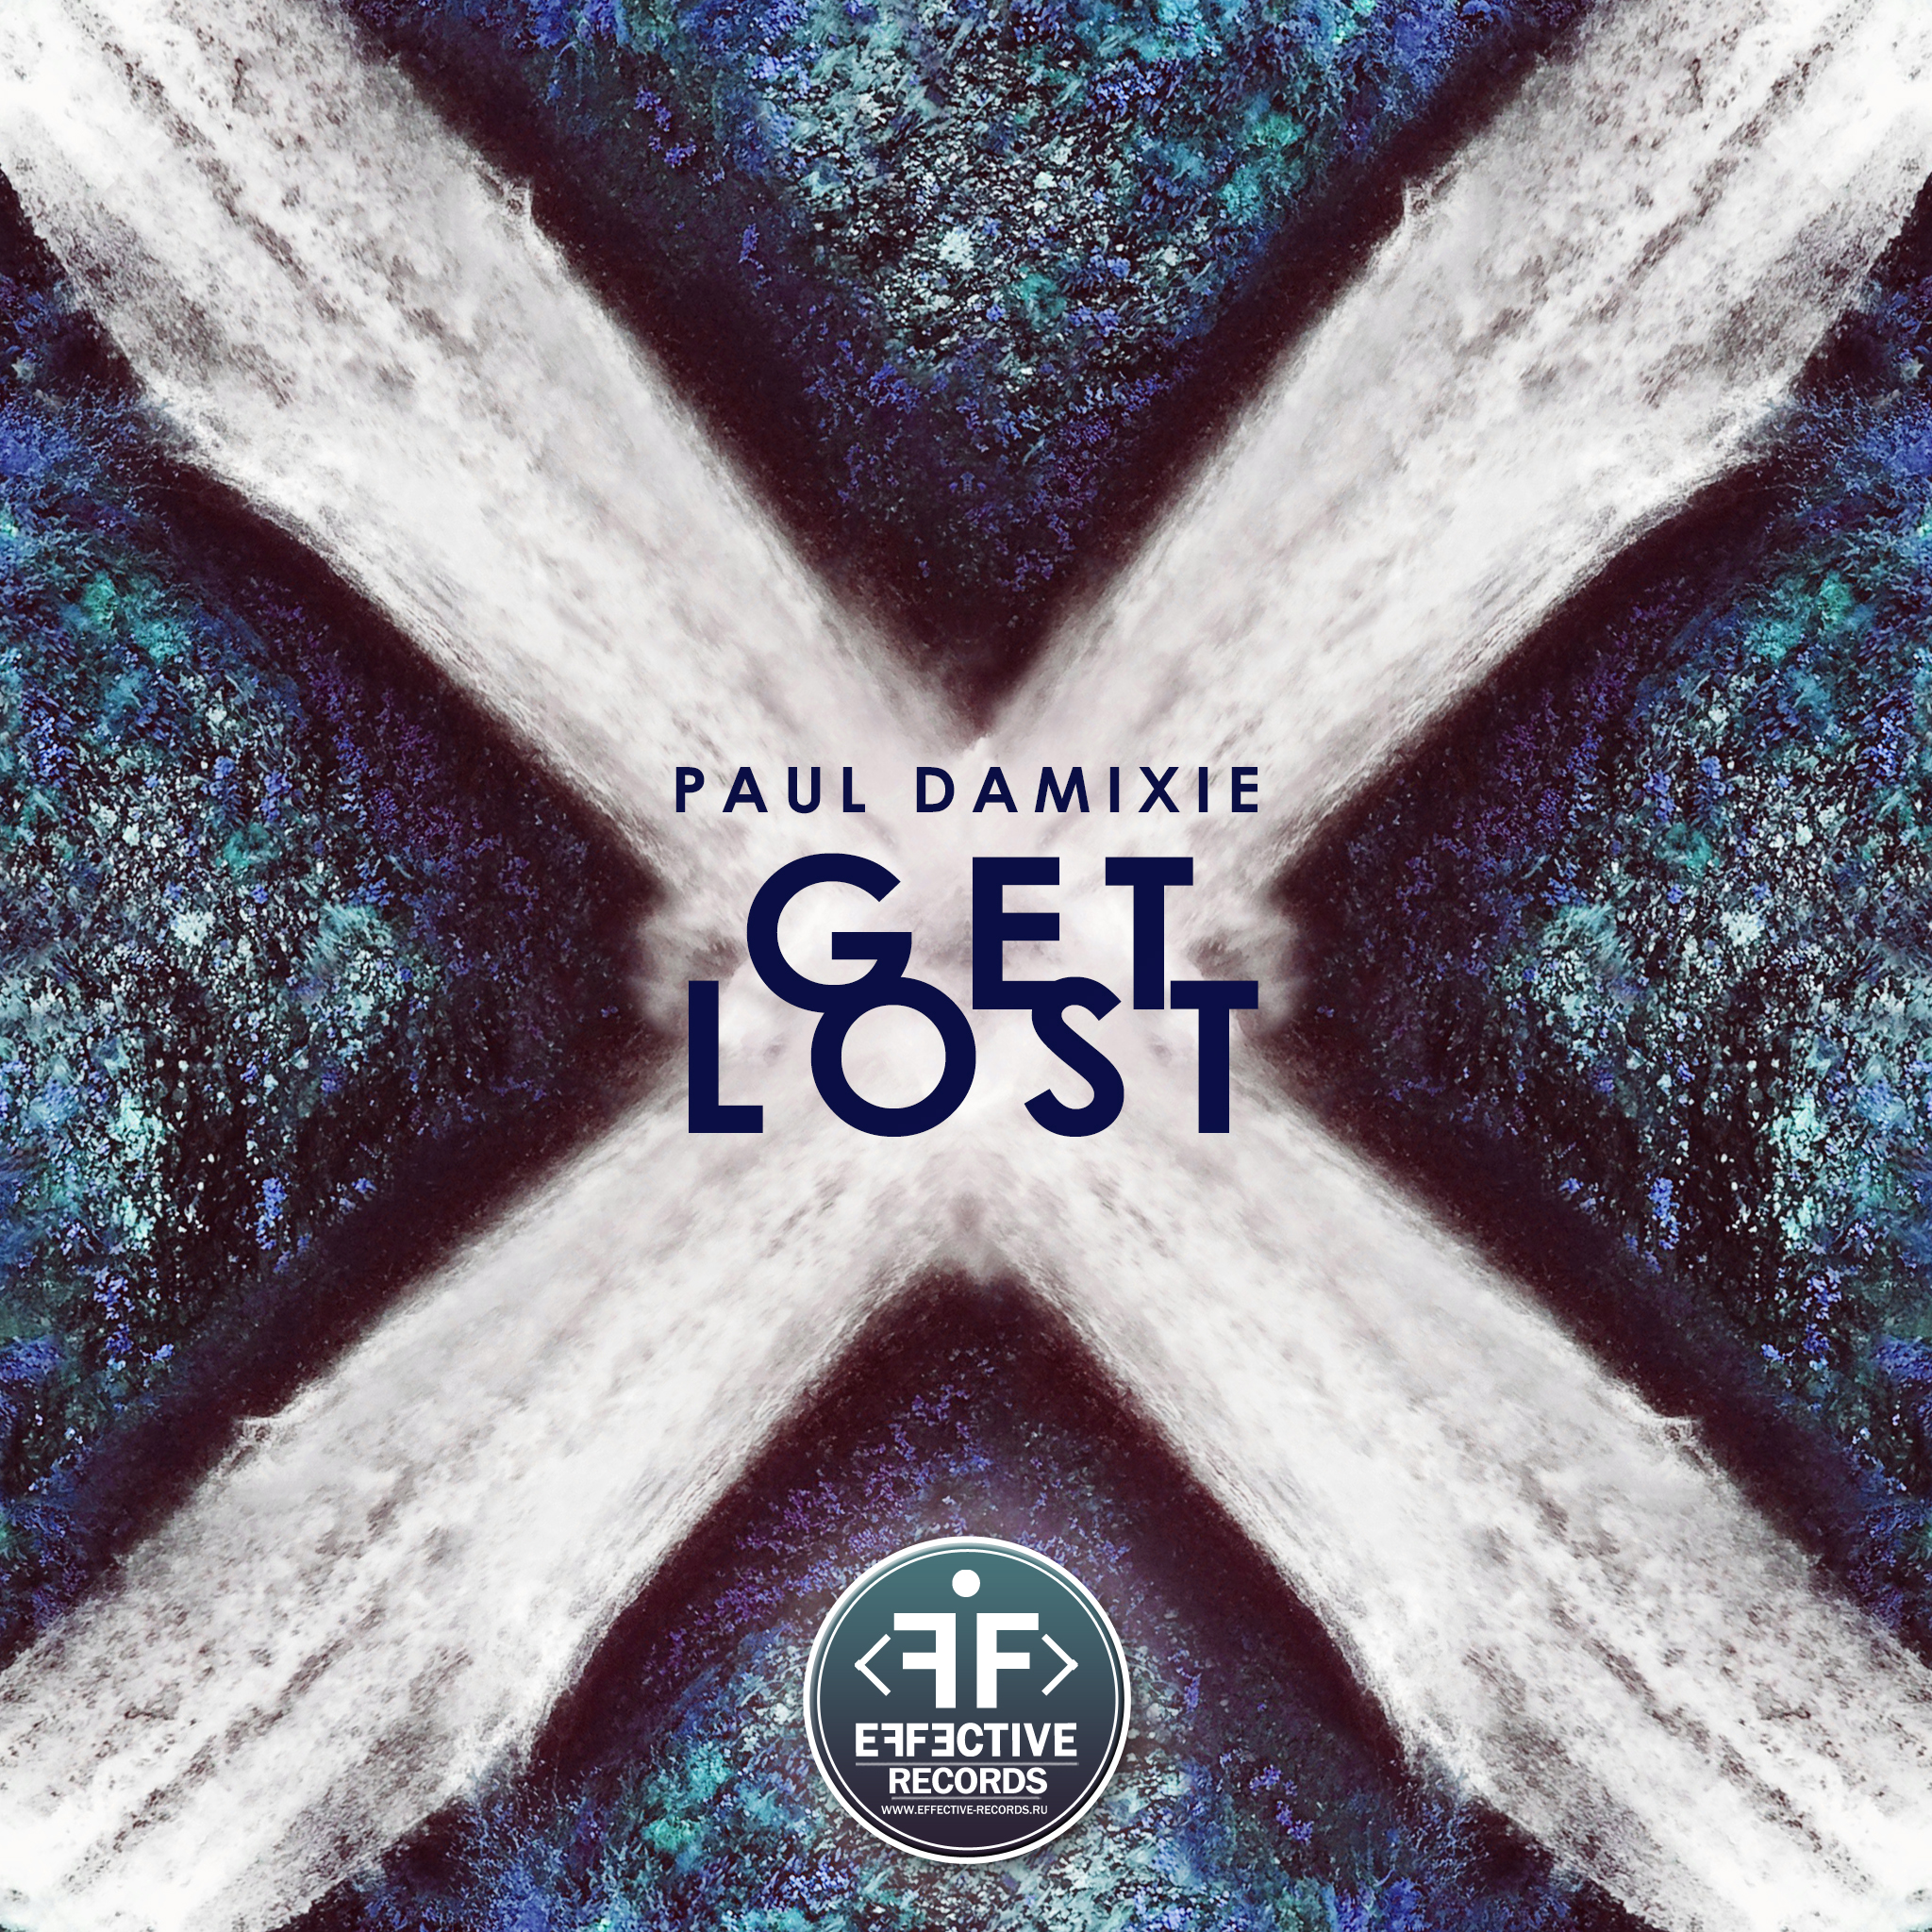 Paul damixie. Get Lost. Let's get Lost. Get Lost (Extended Version).